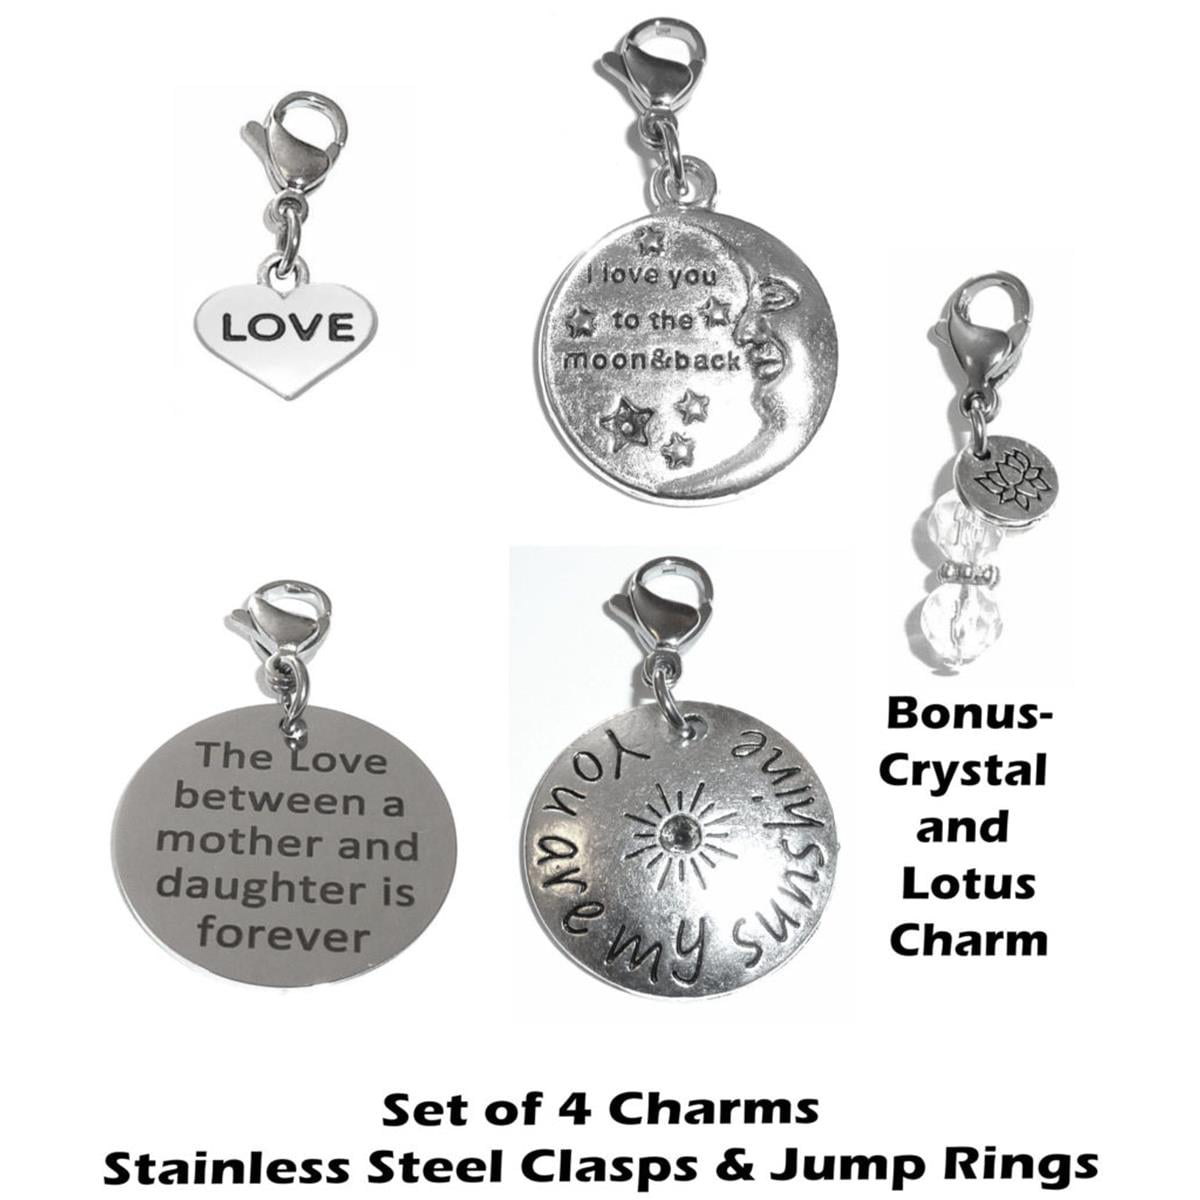 Charms Clip on - Perfect for Bracelet or Necklace, Zipper Pull Charm, Bag or Purse Charm Easy to Use DIY Charms - Be Like A Pineapple Clip on Charm